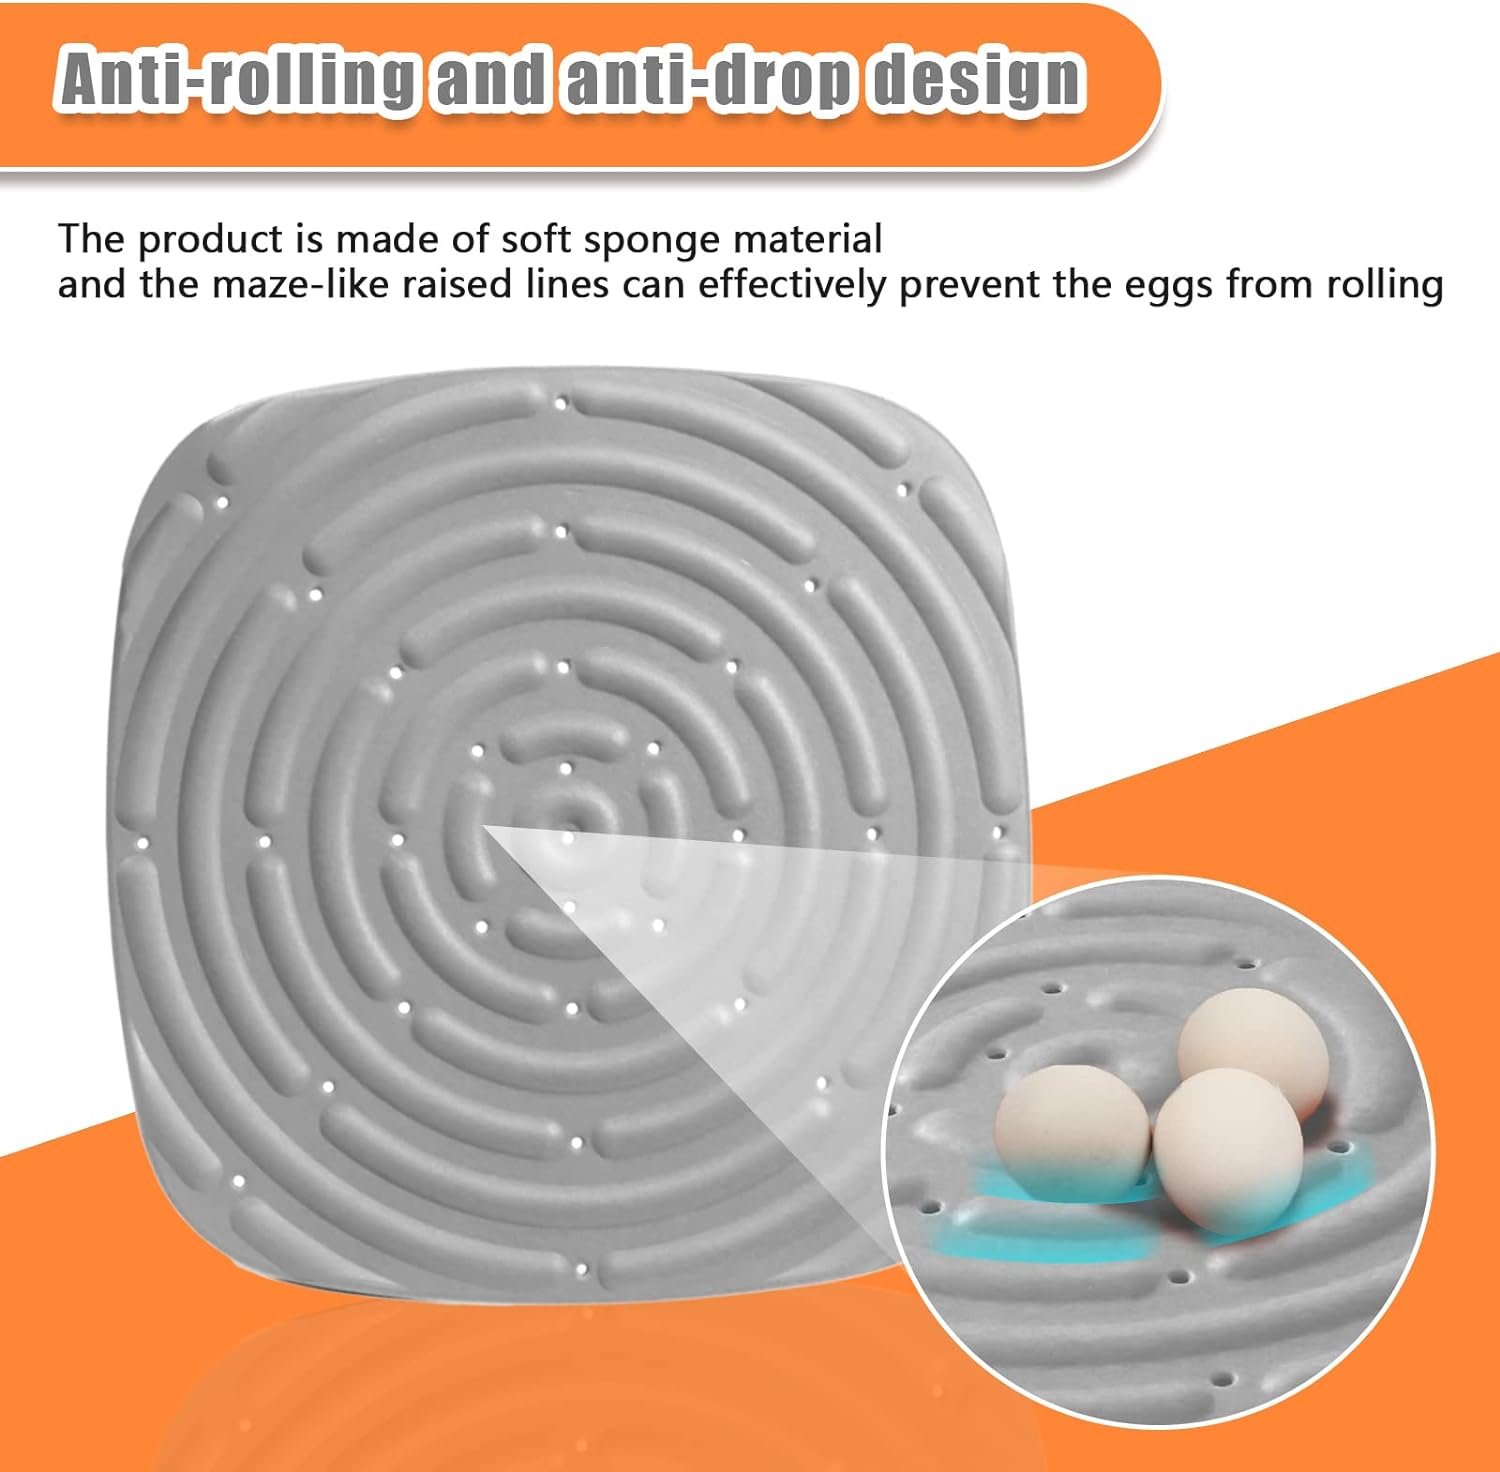 NMM Chicken Nesting Box Pads, 4 Pack Washable Sponge Nesting Box Liners, Reusable Egg Laying Mats for Chicken Coop Poultry Nest Boxes Ducks Poultry, Durable Hen House Accessories (Grey)